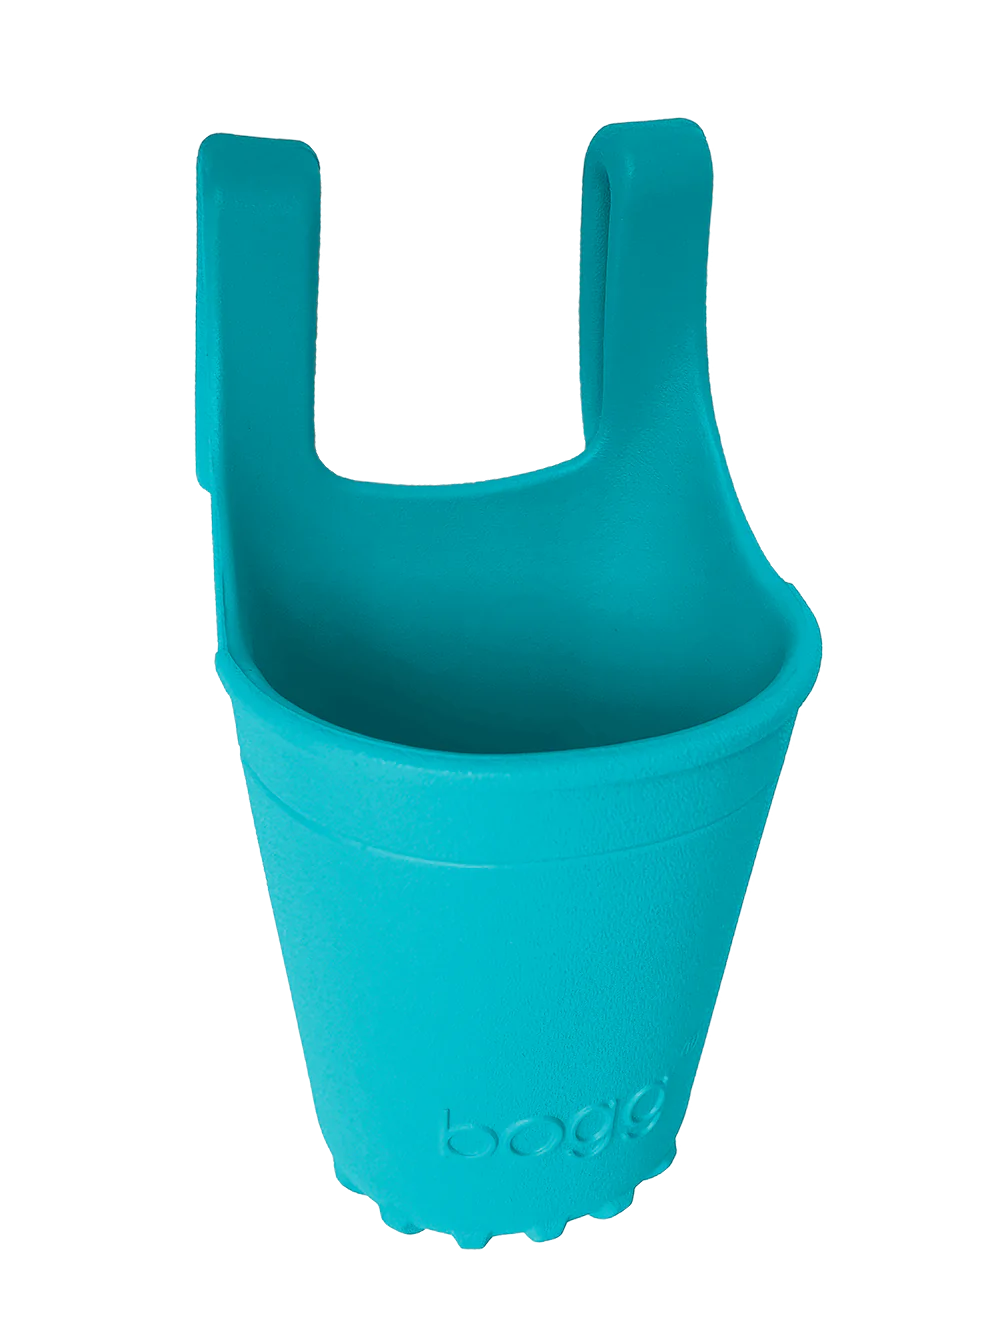 Bogg Bag Bevy: Turquoise and Caicos